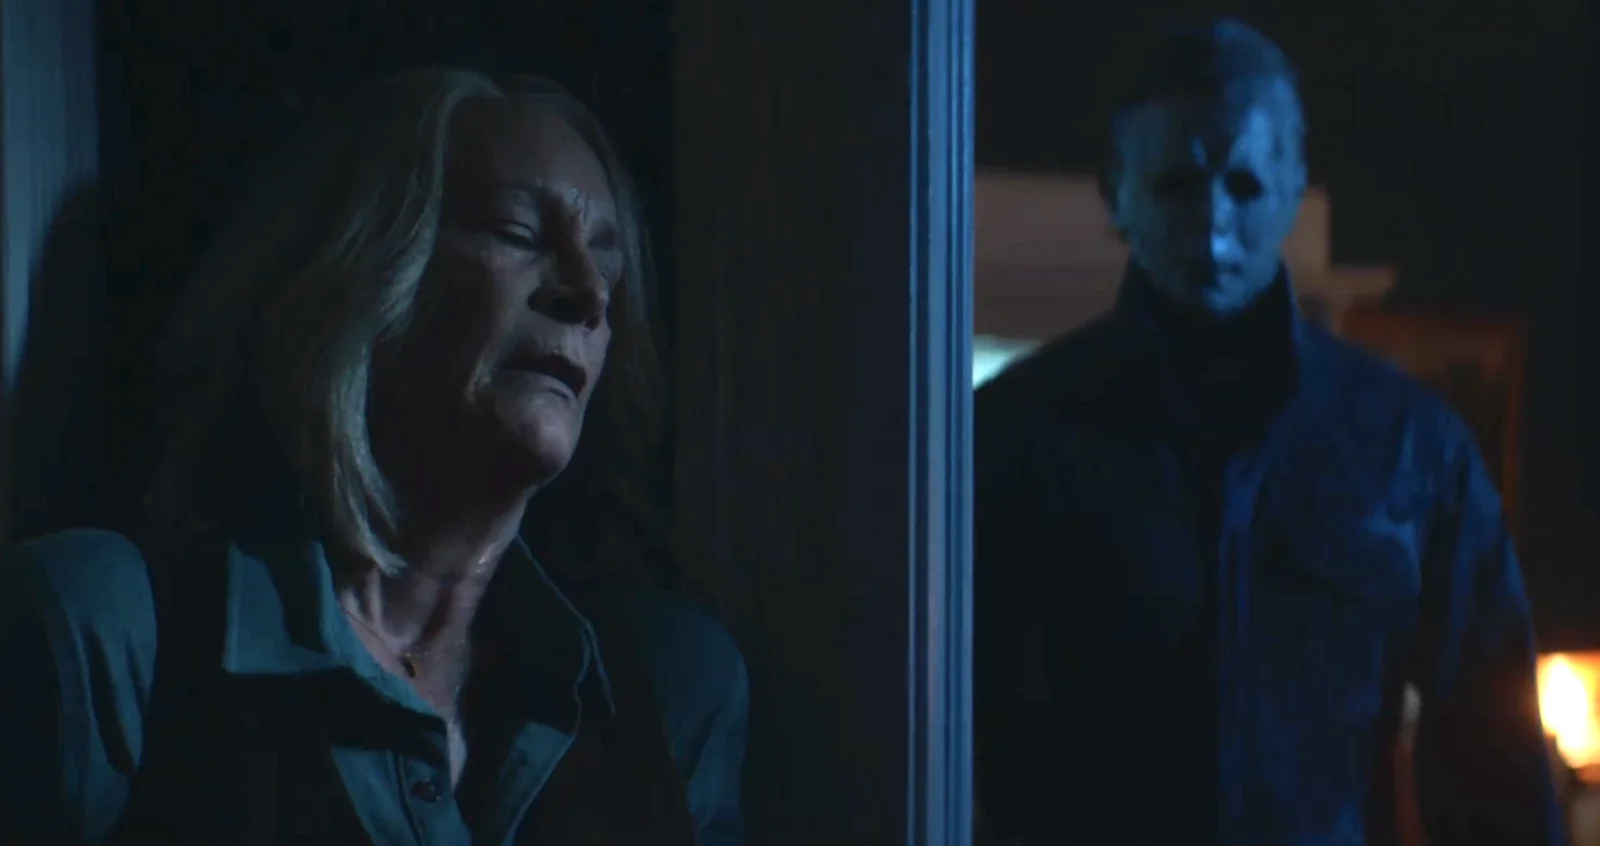 "Halloween Ends" release Official Trailer, the film will be released in Northern America on October 14 | FMV6